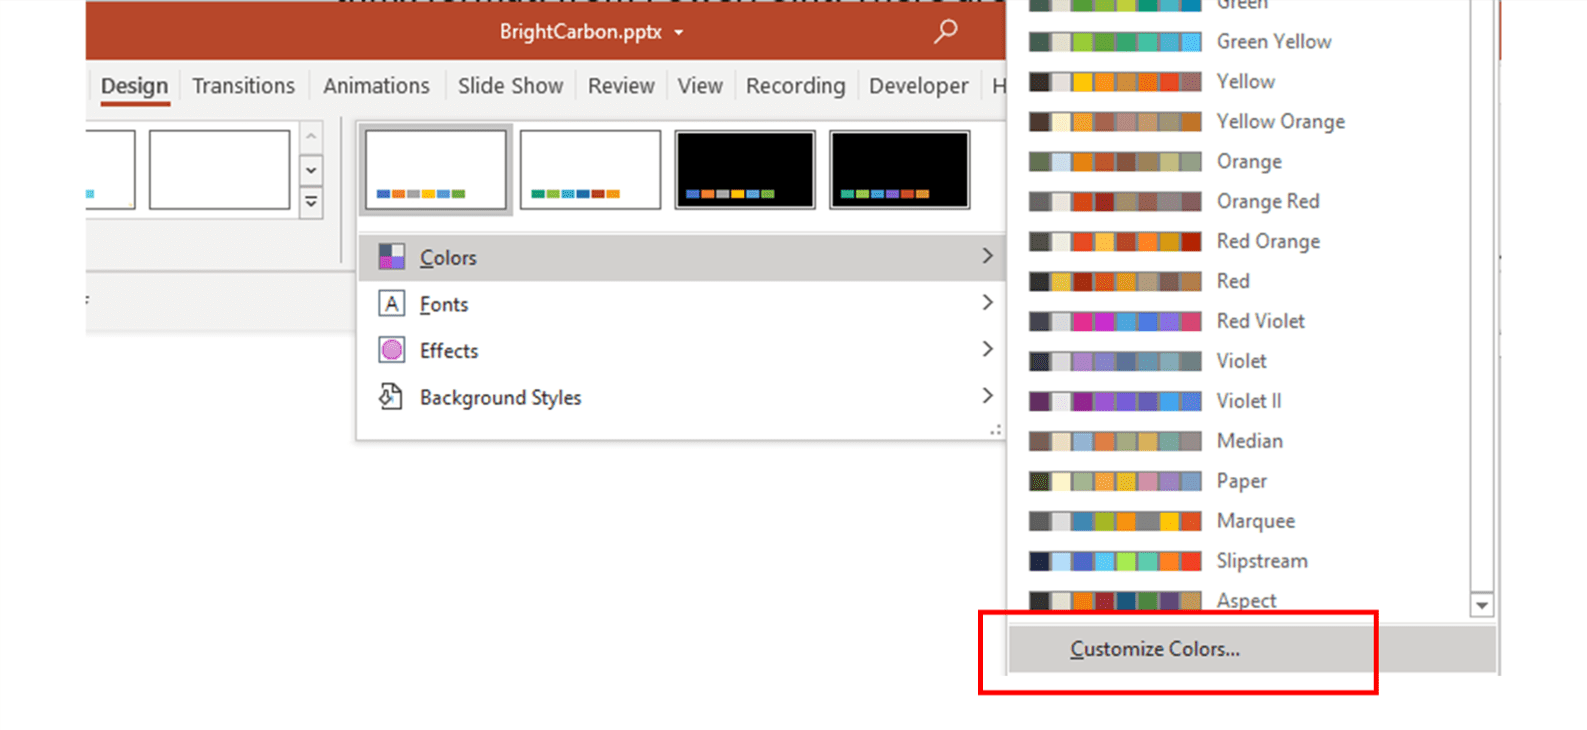 PowerPoint screenshot showing where the customise colors option is